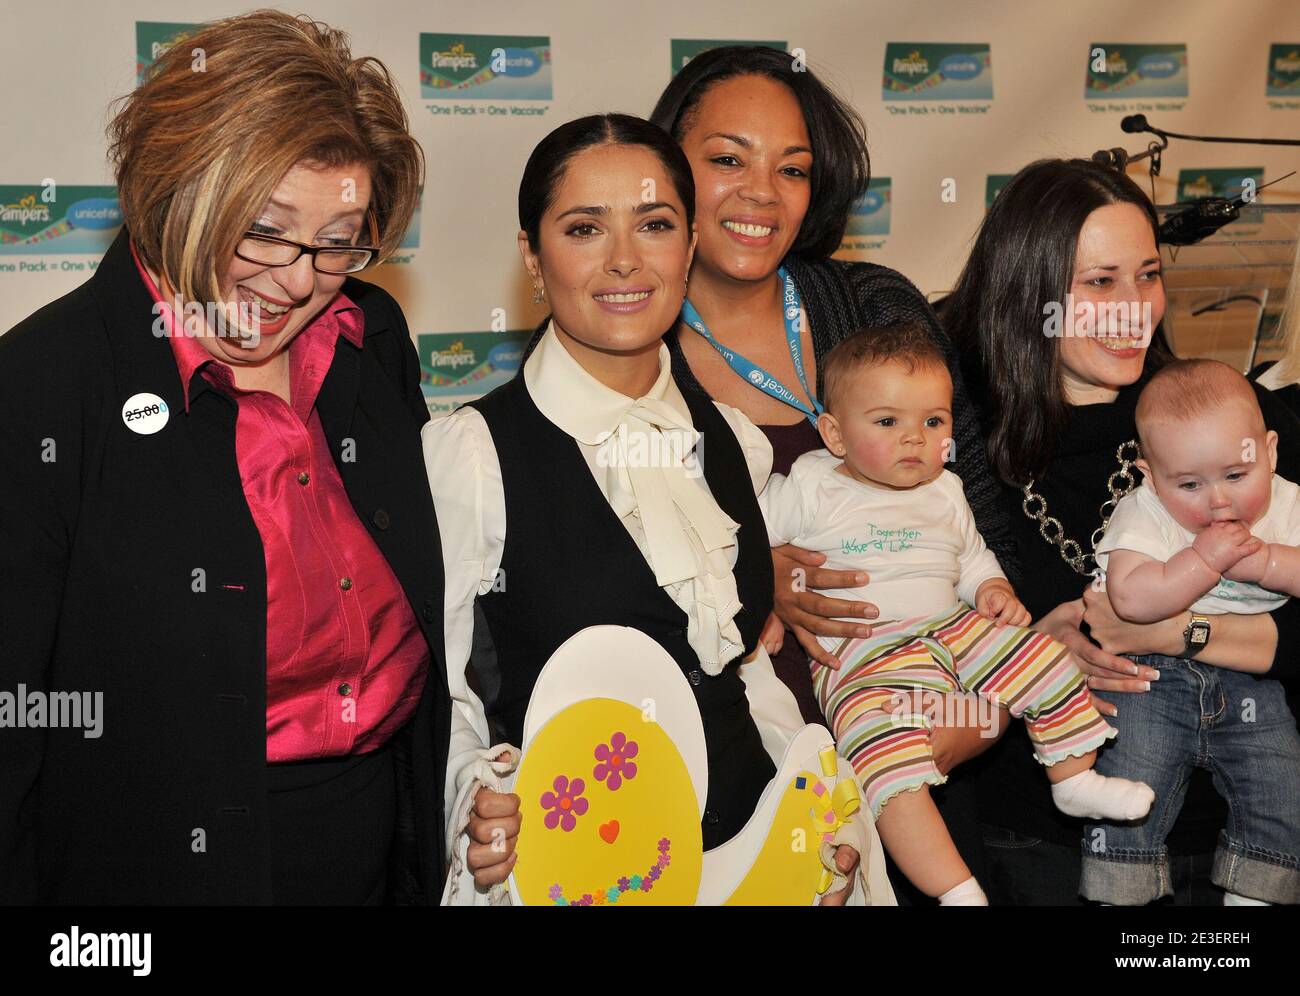 Actress Salma Hayek and Caryl Stern, President and CEO, U.S. Fund for UNICEF launch the 2nd year of the 'One Pack = One Vaccine' campaign, a partnership between Pampers & UNICEF that provides life-saving vaccines to help eliminate Maternal and Neonatal Tetanus, at US Fund for UNICEF in New York City, NY, USA on February 5, 2009. Through May 1, 2009, for every specially marked pack of Pampers product purchased in the USA and Canada, Pampers will provide UNICEF with funding for one life-saving tetanus vaccine. Photo by Slaven Vlasic/ABACA Stock Photo